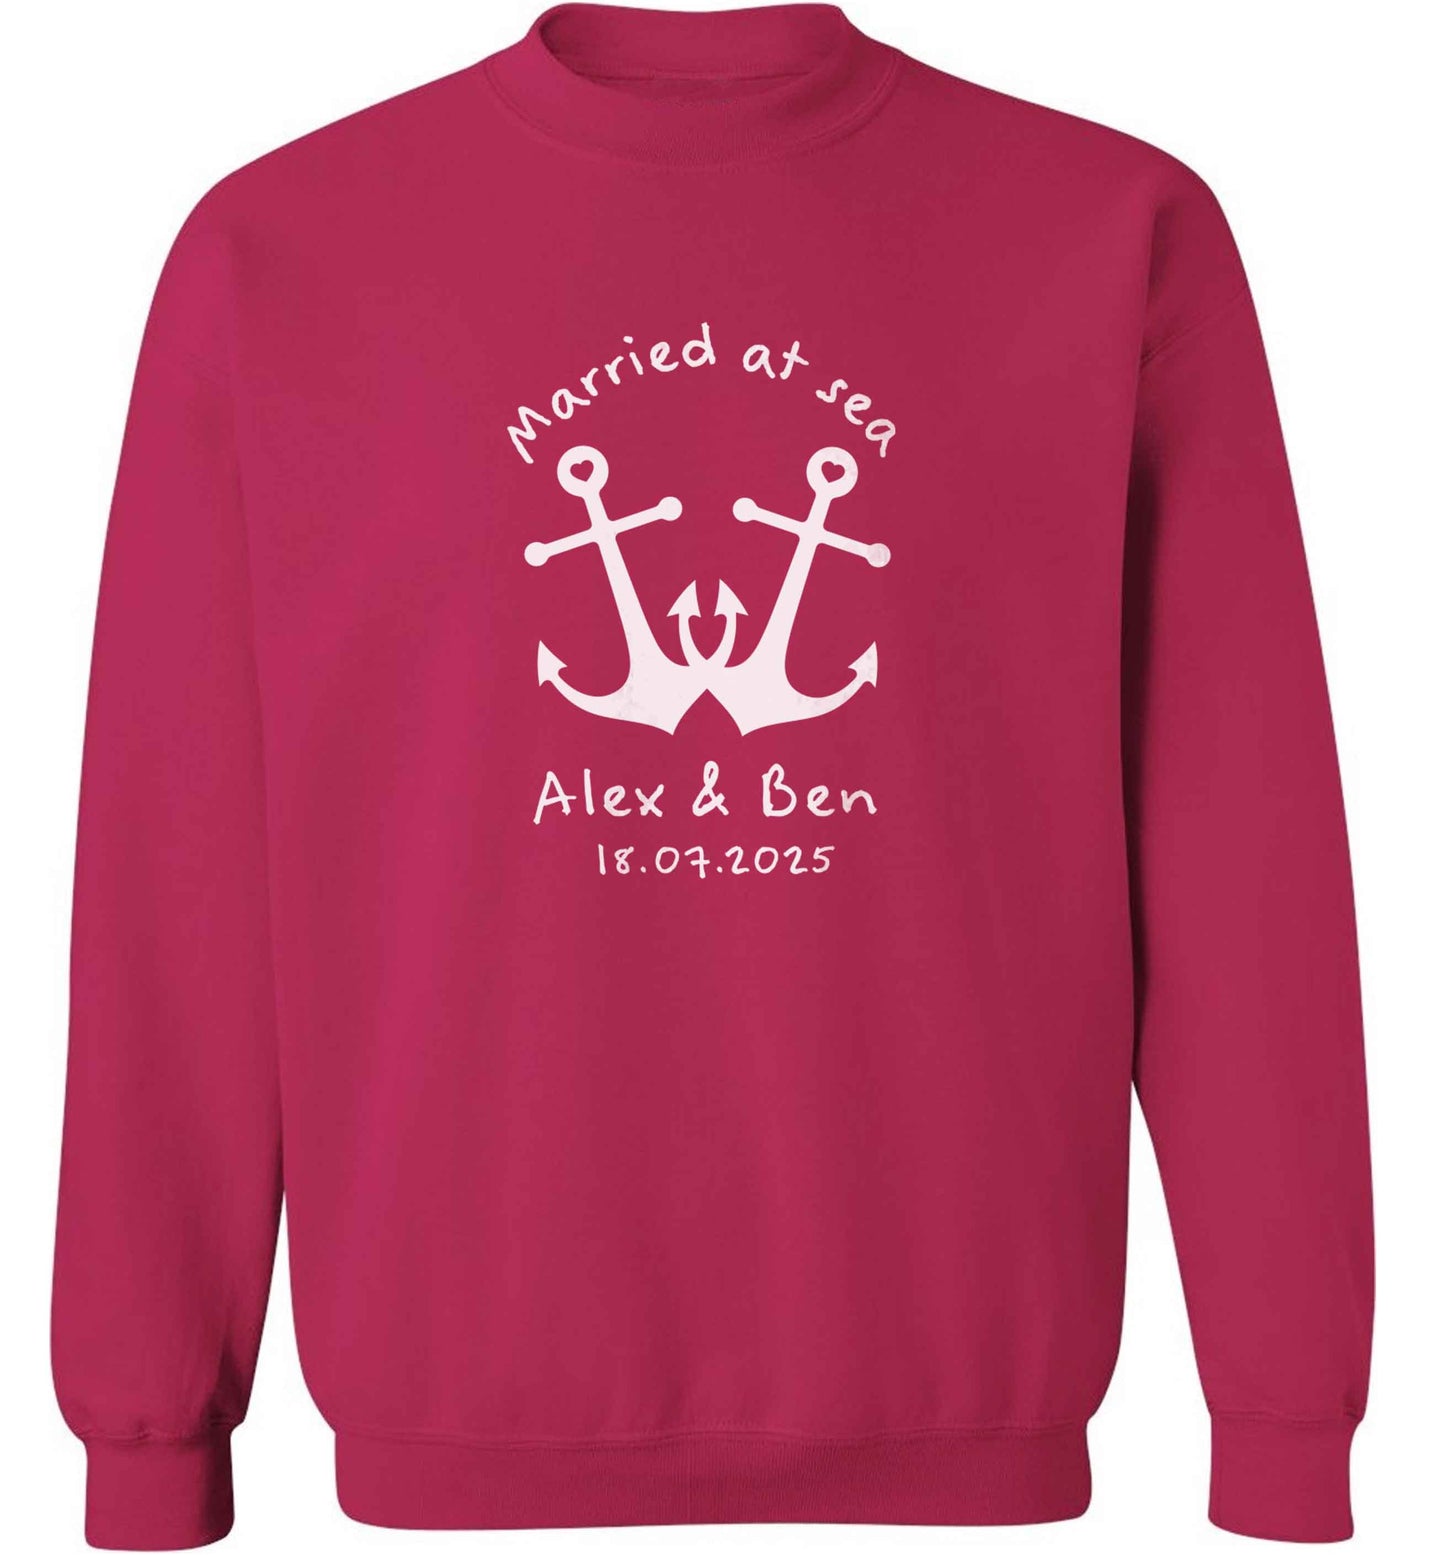 Married at sea blue anchors adult's unisex pink sweater 2XL